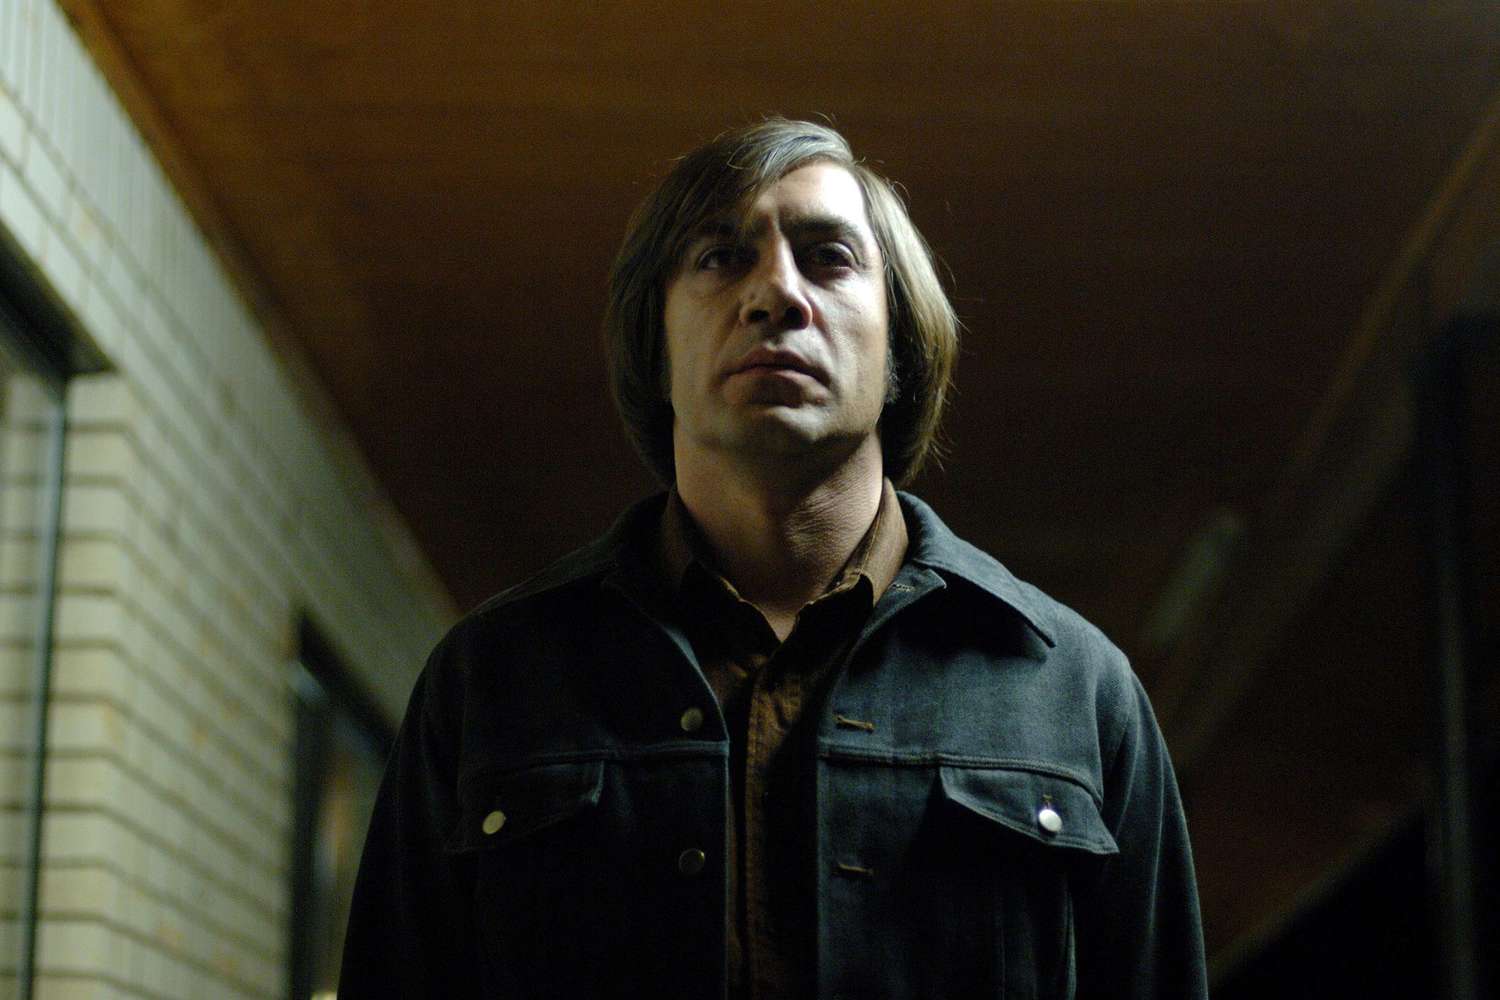 No Country for Old Men&nbsp;based on the novel&nbsp;No Country For Old Men by Cormac McCarthy &nbsp;